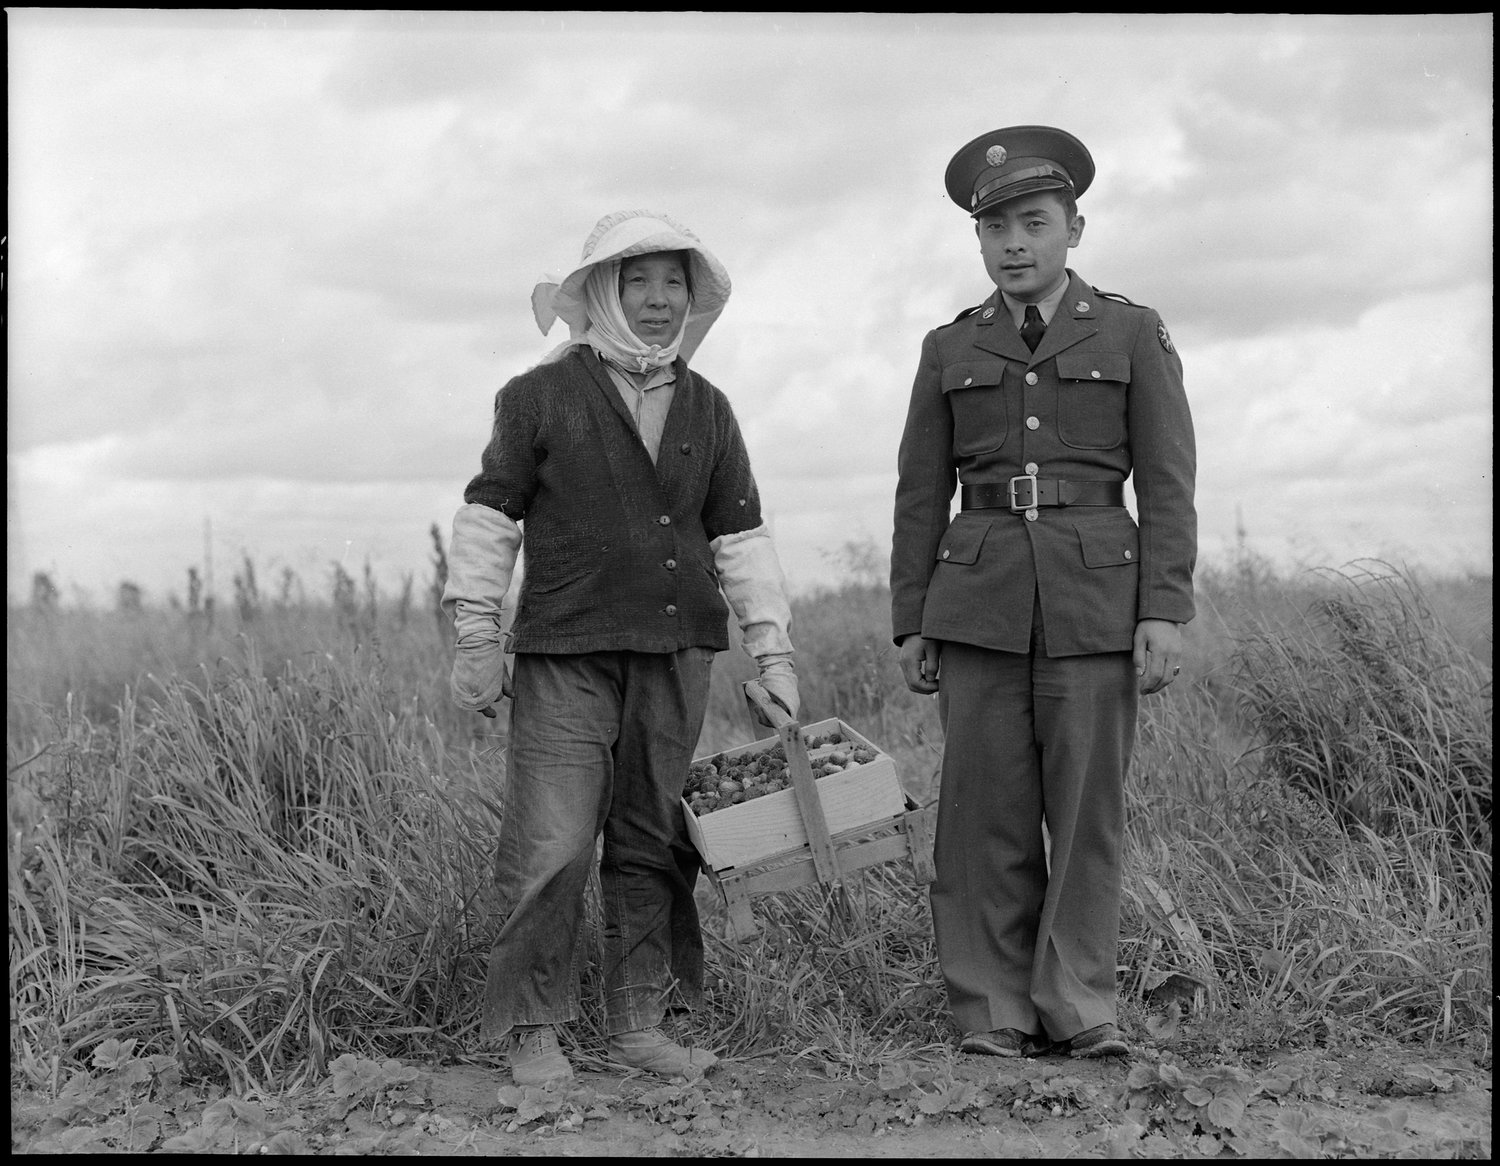  Florin, Sacramento County, California. A soldier and his mother in a strawberry field. The soldier, age 23, volunteered July 10, 1941, and is stationed at Camp Leonard Wood, Missouri. He was furloughed to help his mother and family prepare for their evacuation. He is the youngest of six years children, two of them volunteers in United States Army. The mother, age 53, came from Japan 37 years ago. Her husband died 21 years ago, leaving her to raise six children. She worked in a strawbery basket factory until last year when her her children leased three acres of strawberries "so she wouldn't have to work for somebody else". The family is Buddhist. This is her youngest son. Her second son is in the army stationed at Fort Bliss. 453 families are to be evacuated from this area. 